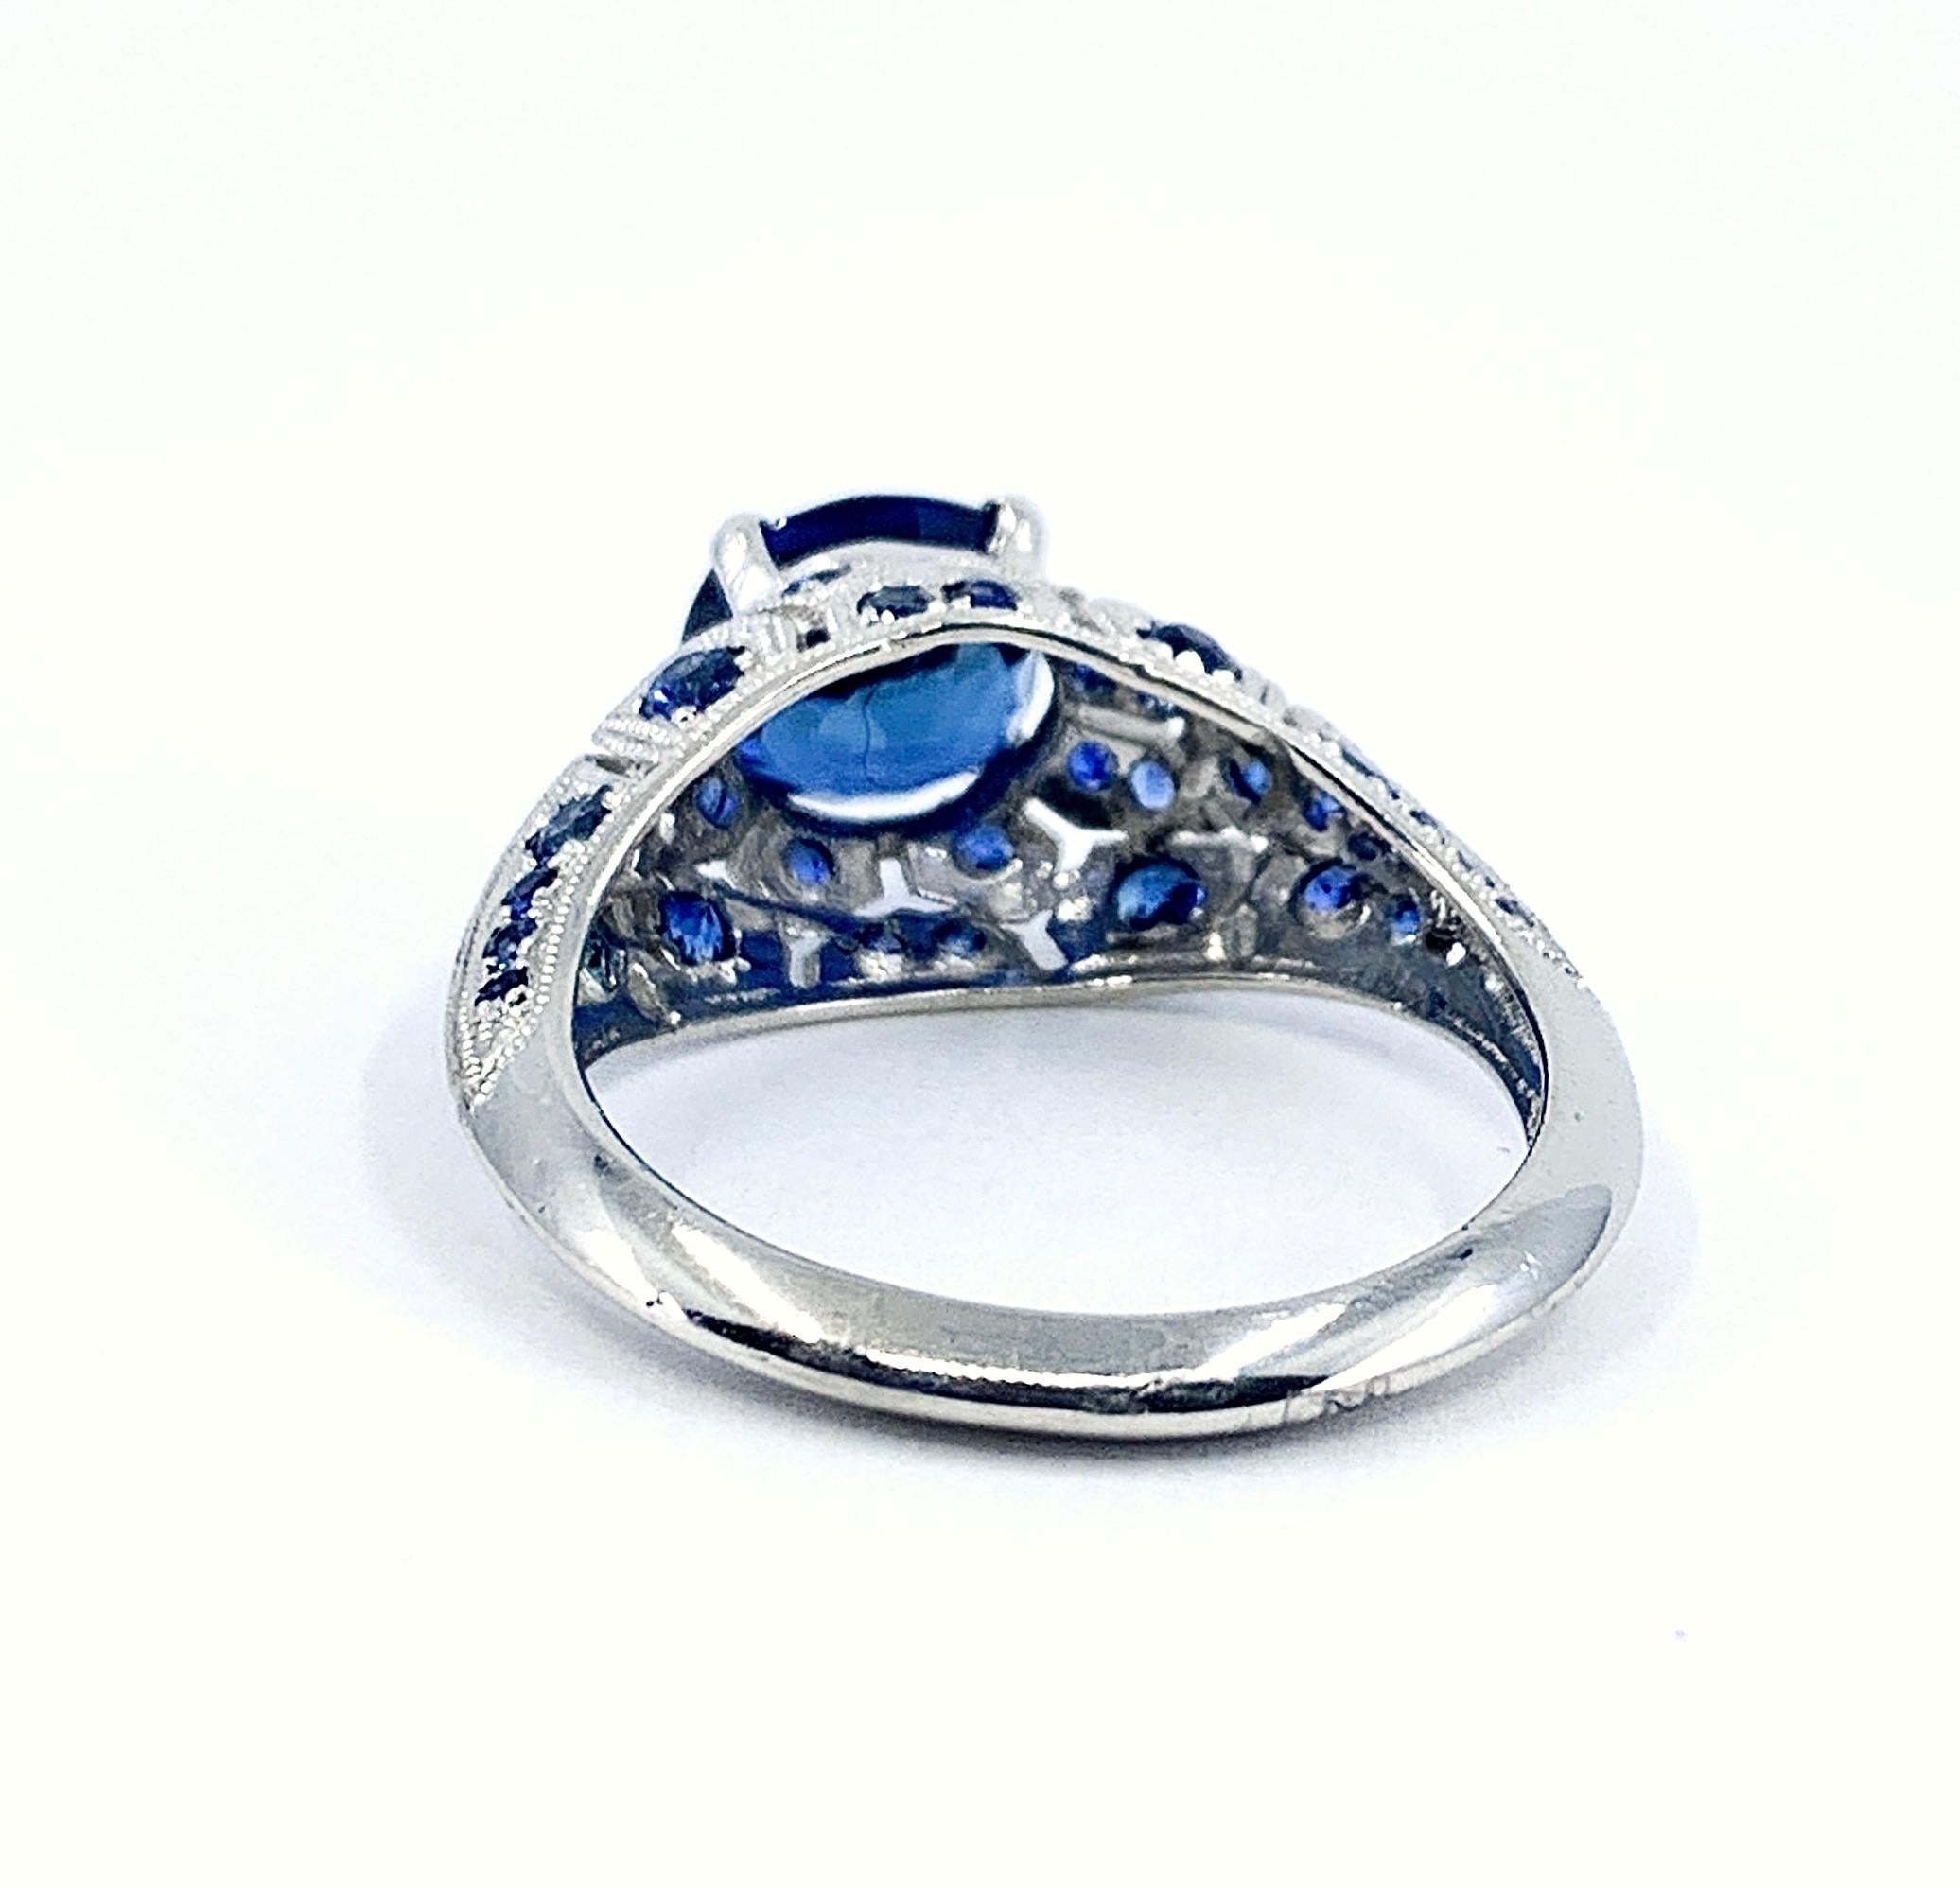 GIA-Certified 1.99 Carat Oval Sapphire in Platinum Edwardian-Style Bombe Setting For Sale 6